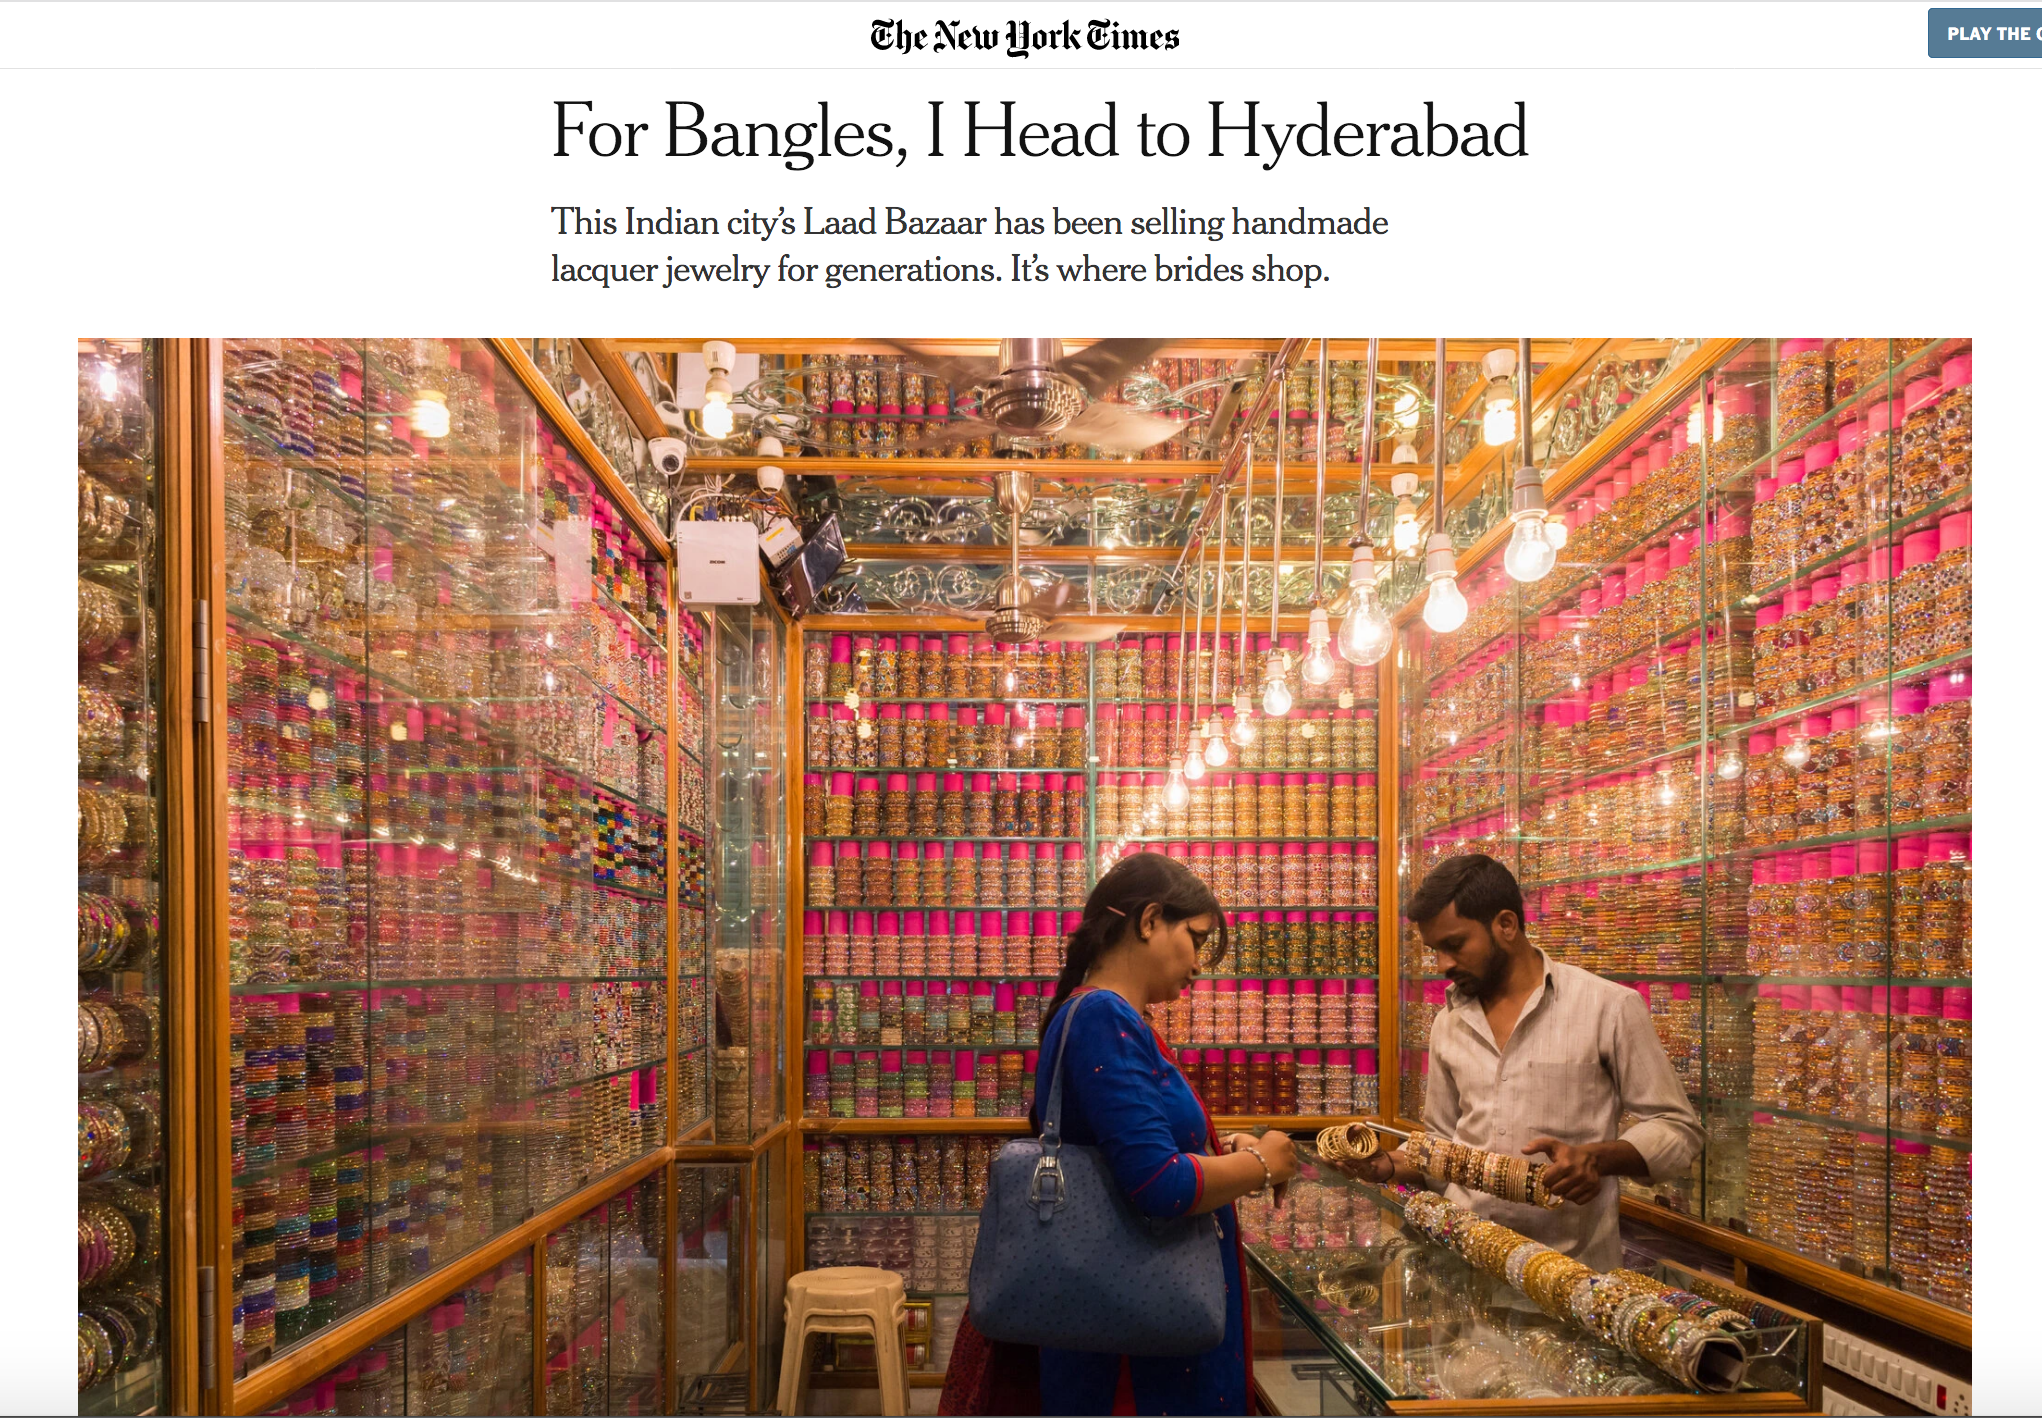 New York Times: For Bangles I Head to Hyderabad